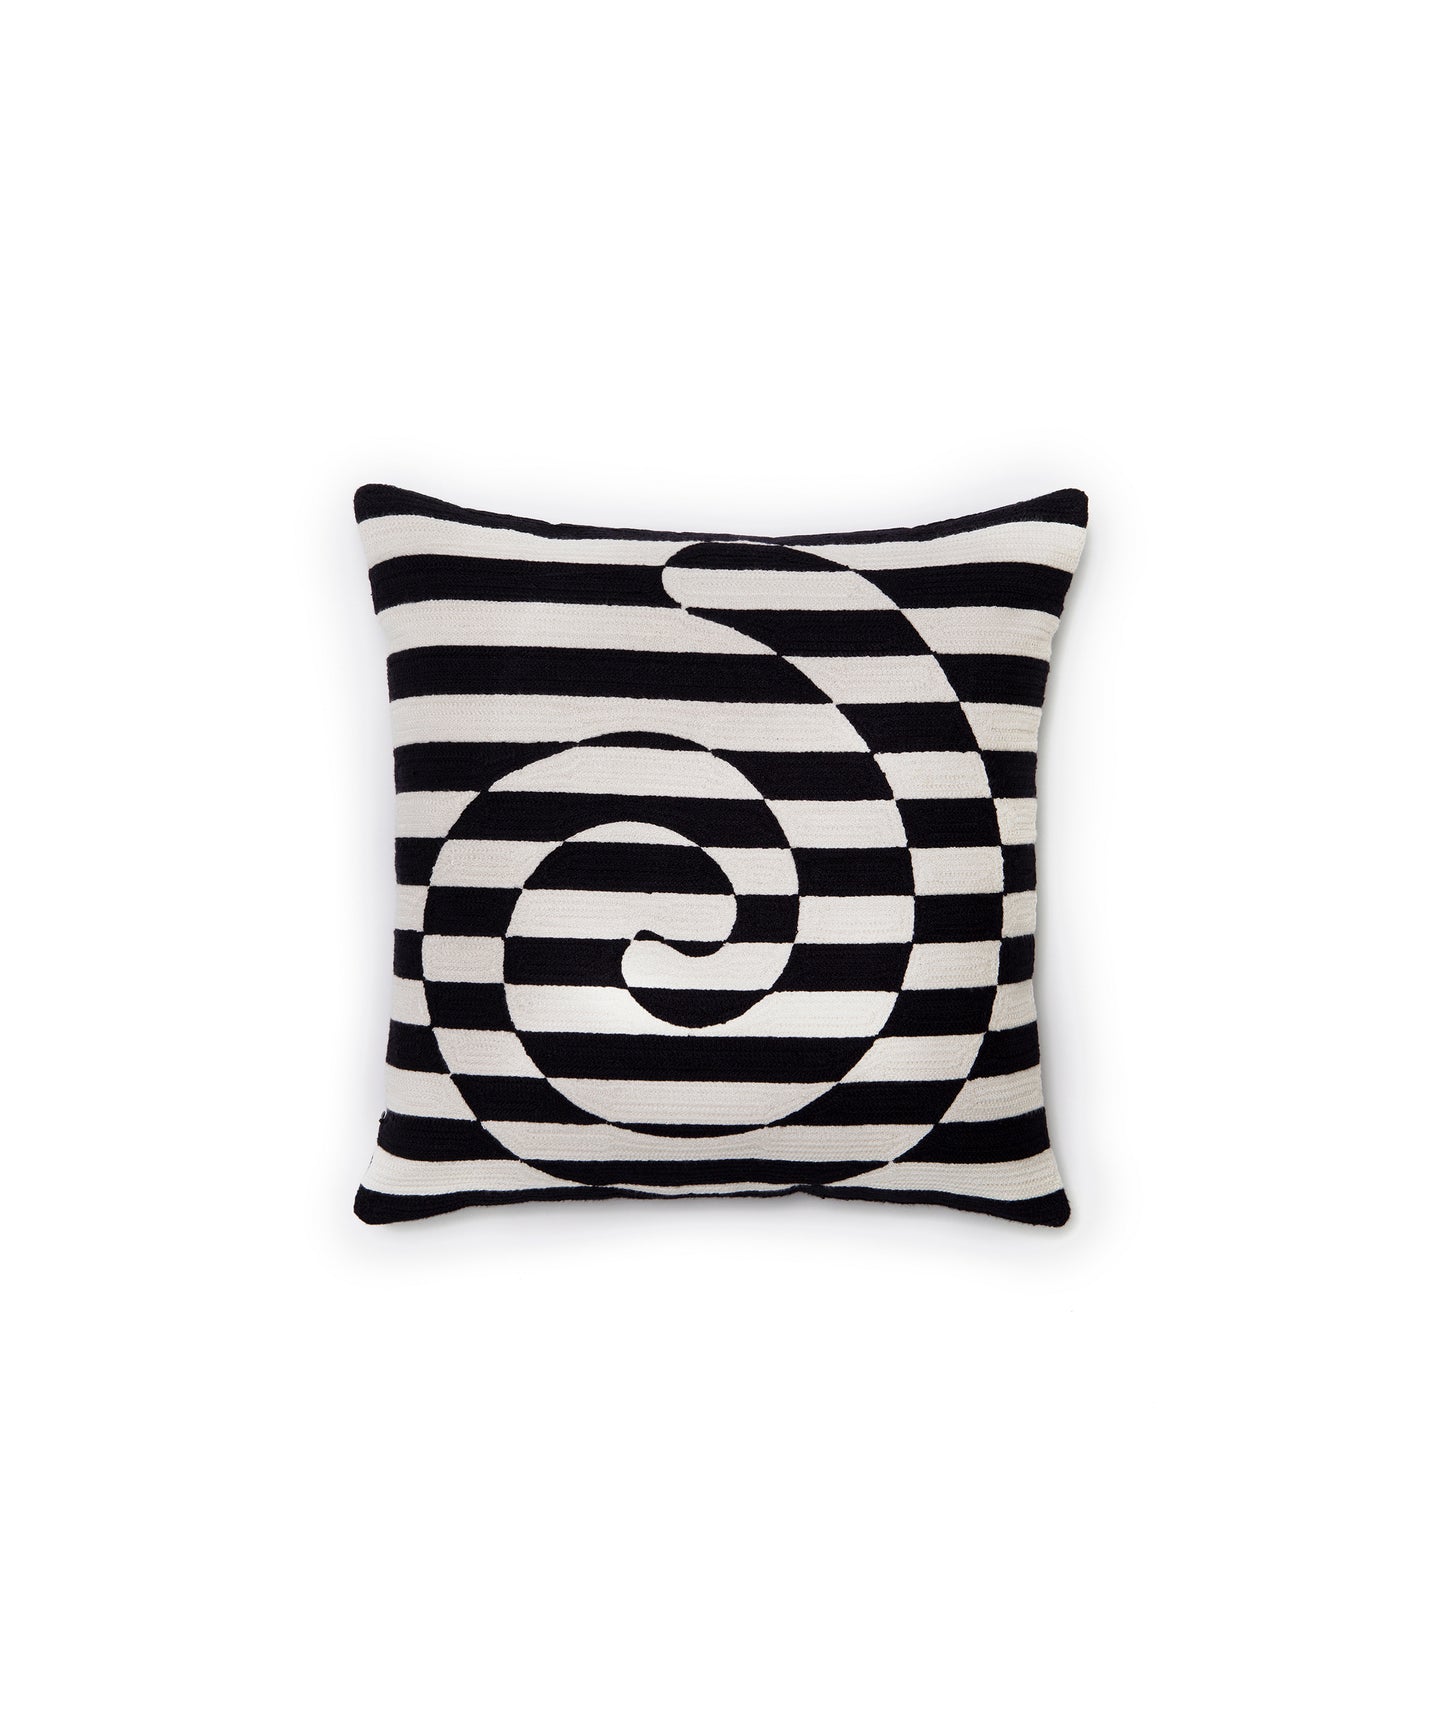 Image of Dazzle Pillow Cover with a black and white striped swirl design. There is one swirl in the center of the design. This pillow cover is 100% cotton and measures 18 inches square.